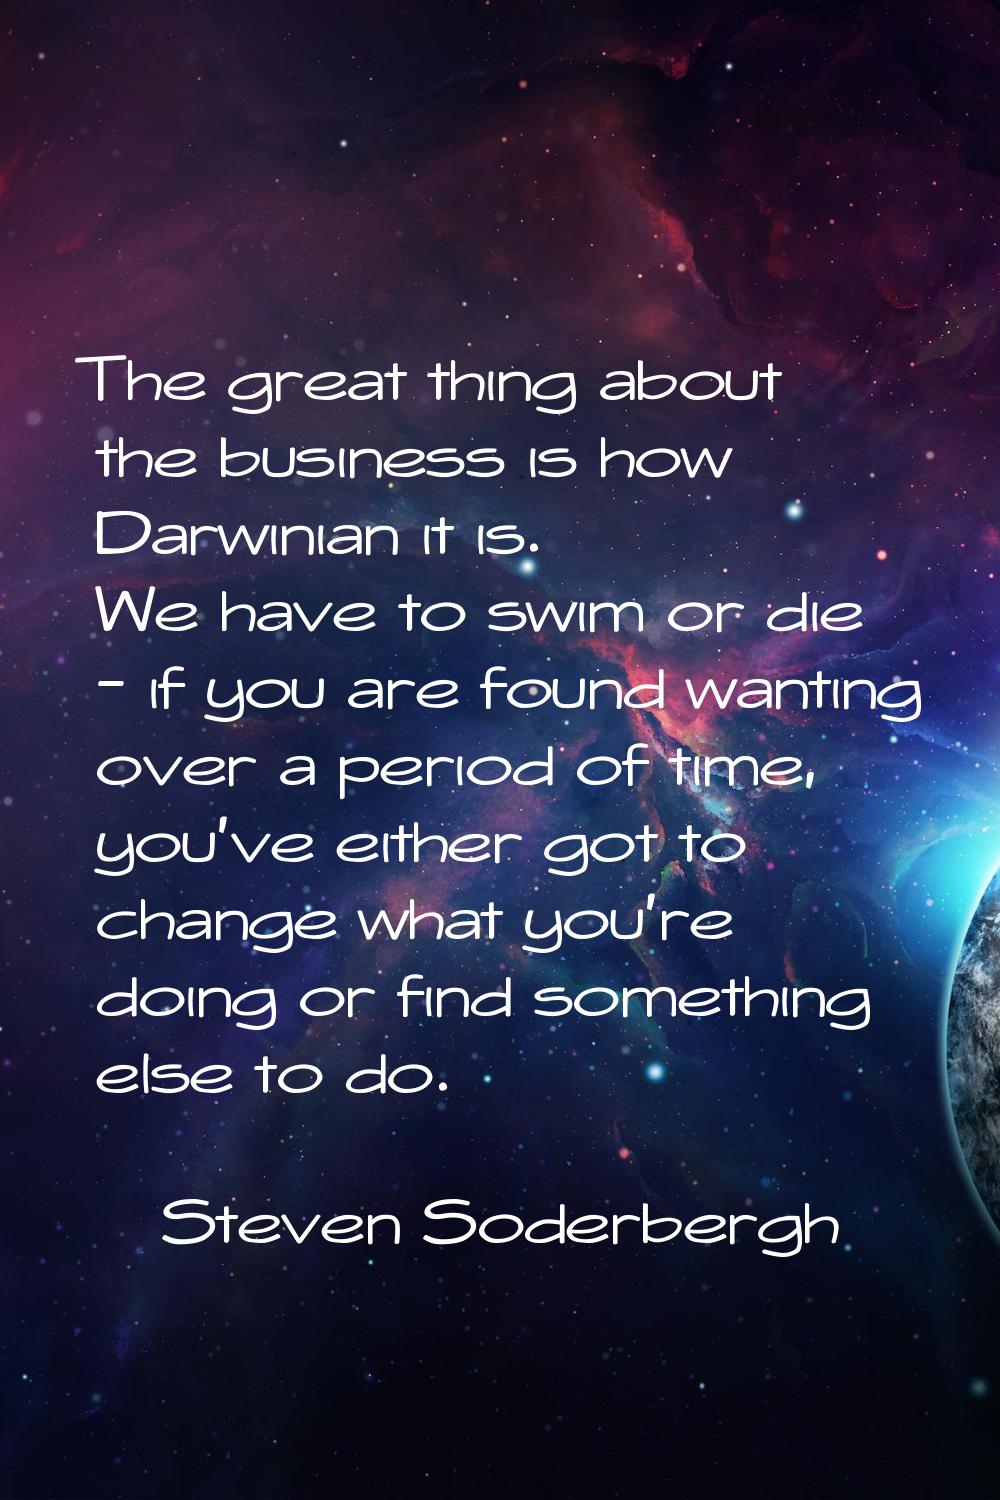 The great thing about the business is how Darwinian it is. We have to swim or die - if you are foun